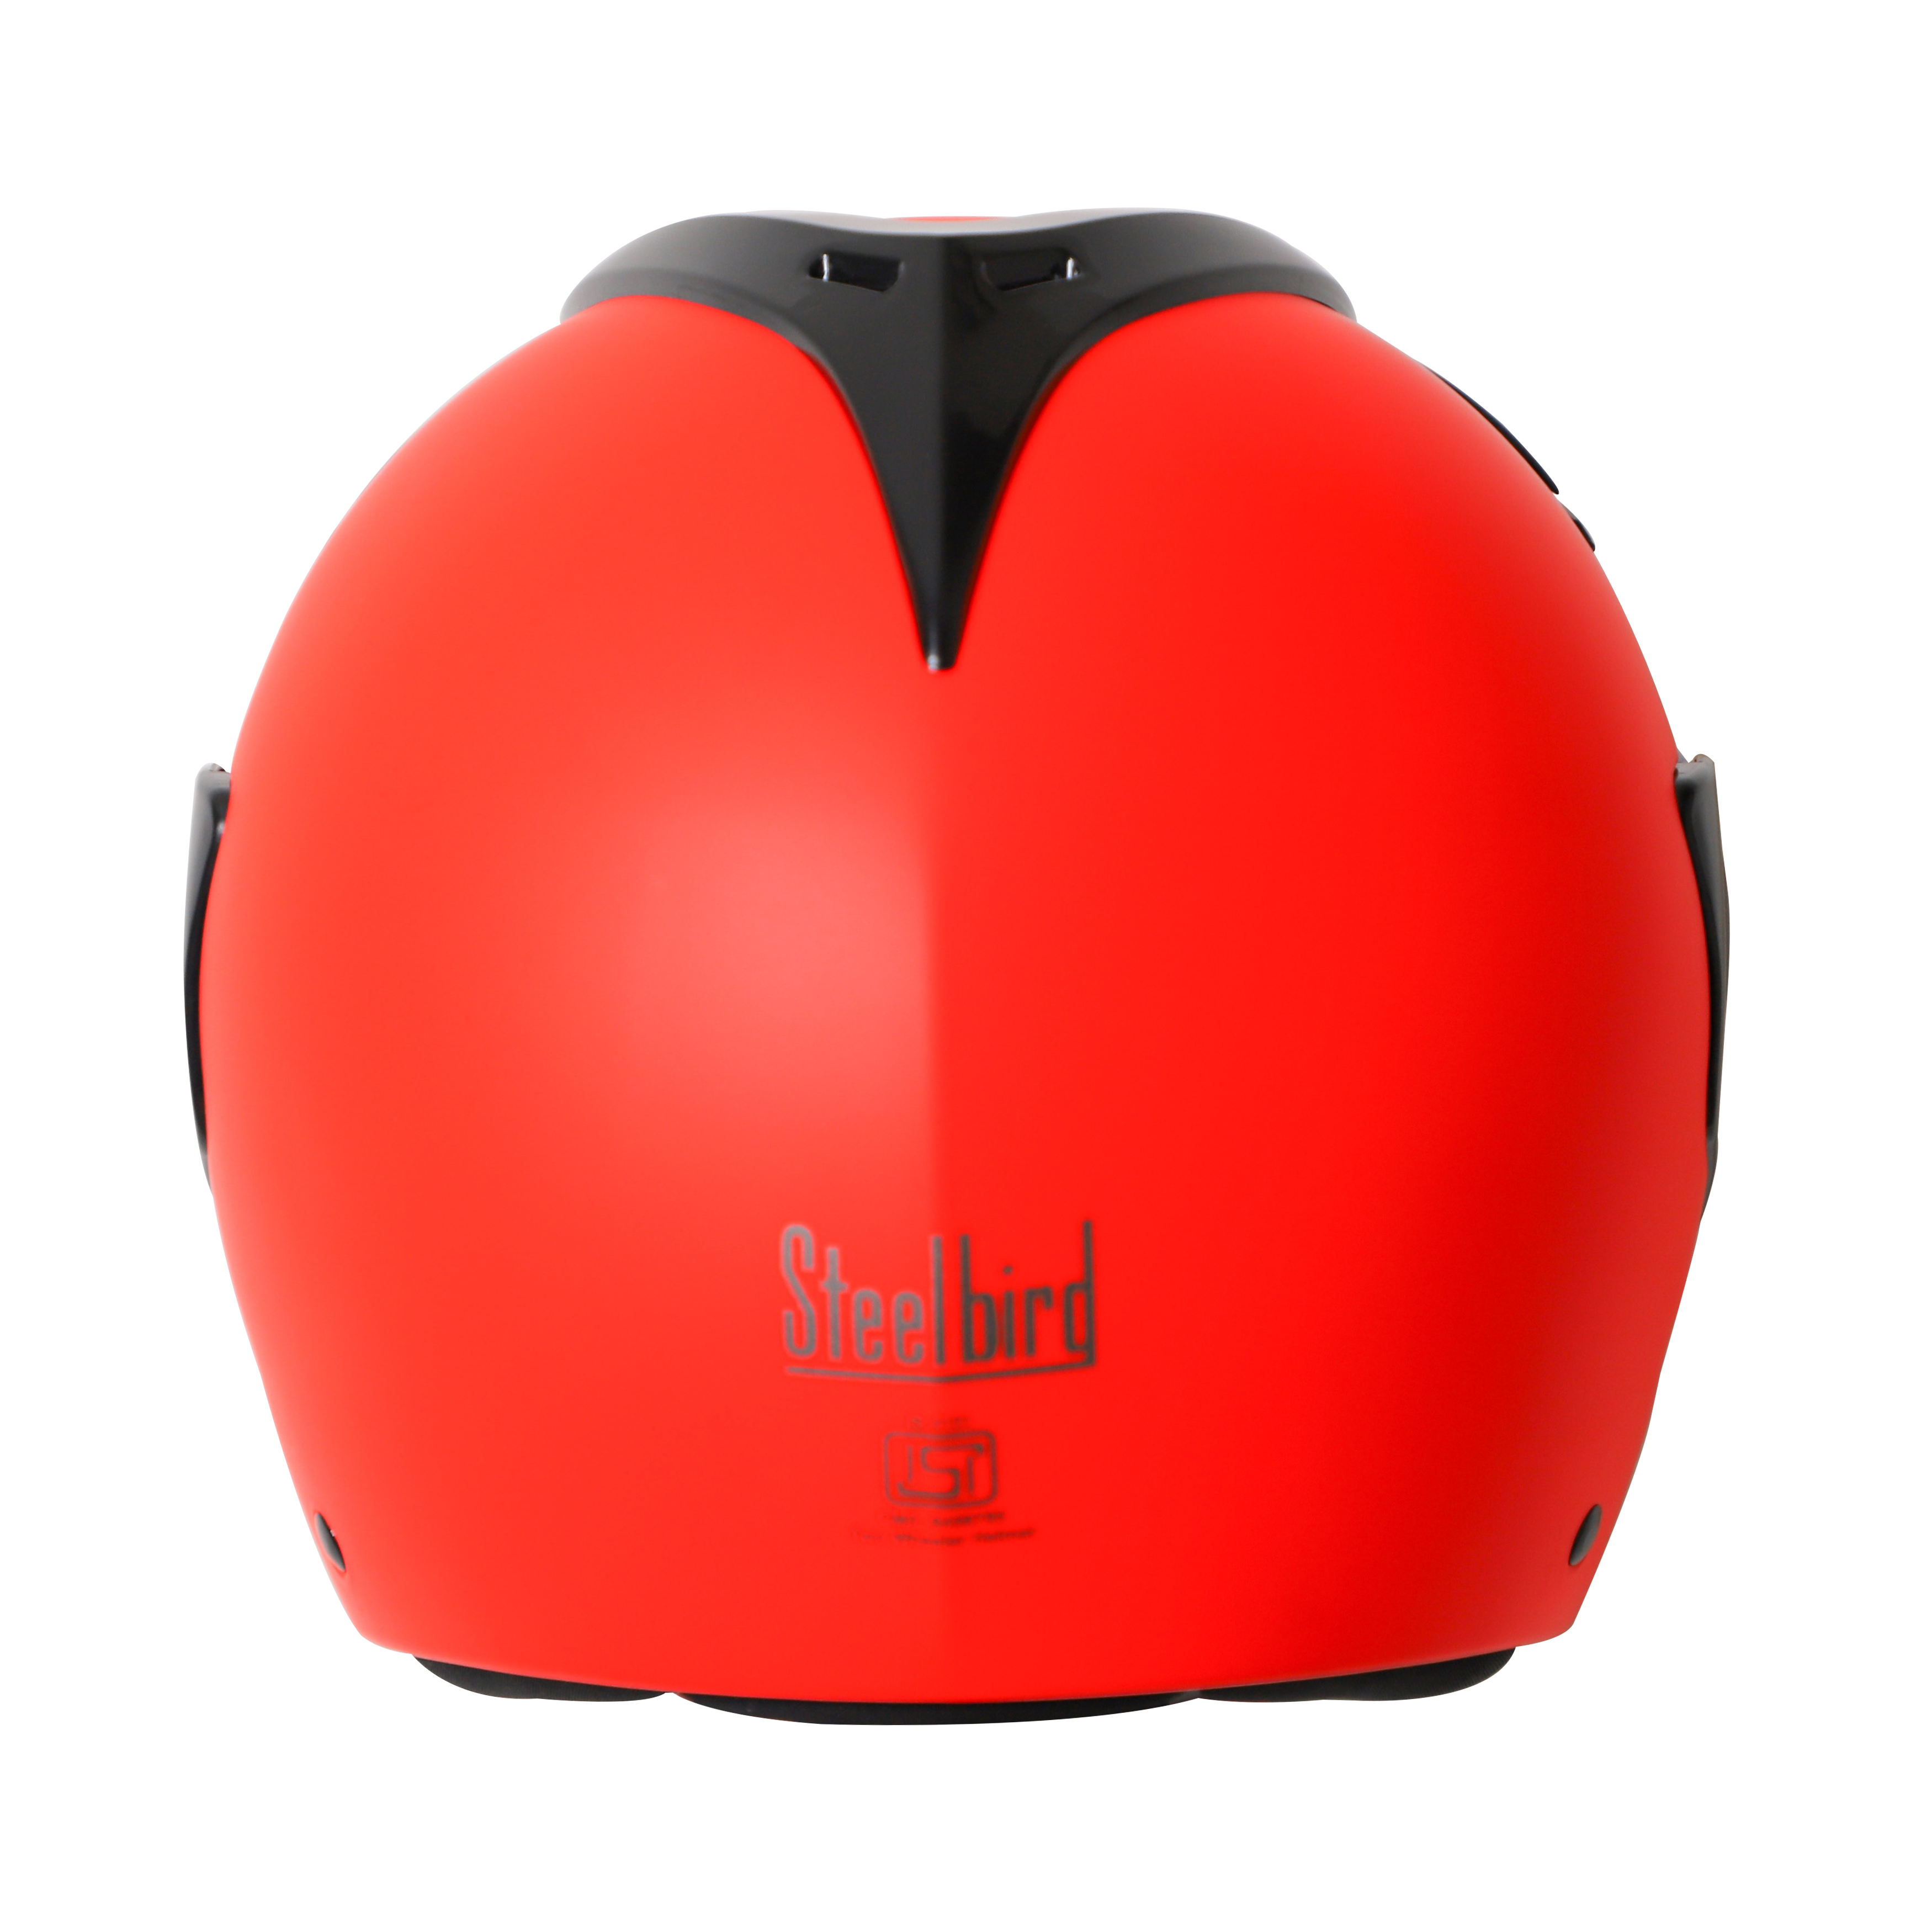 Steelbird SB-34 ISI Certified Flip-Up Helmet For Men And Women (Glossy Fluo Red With Chrome Gold Visor)